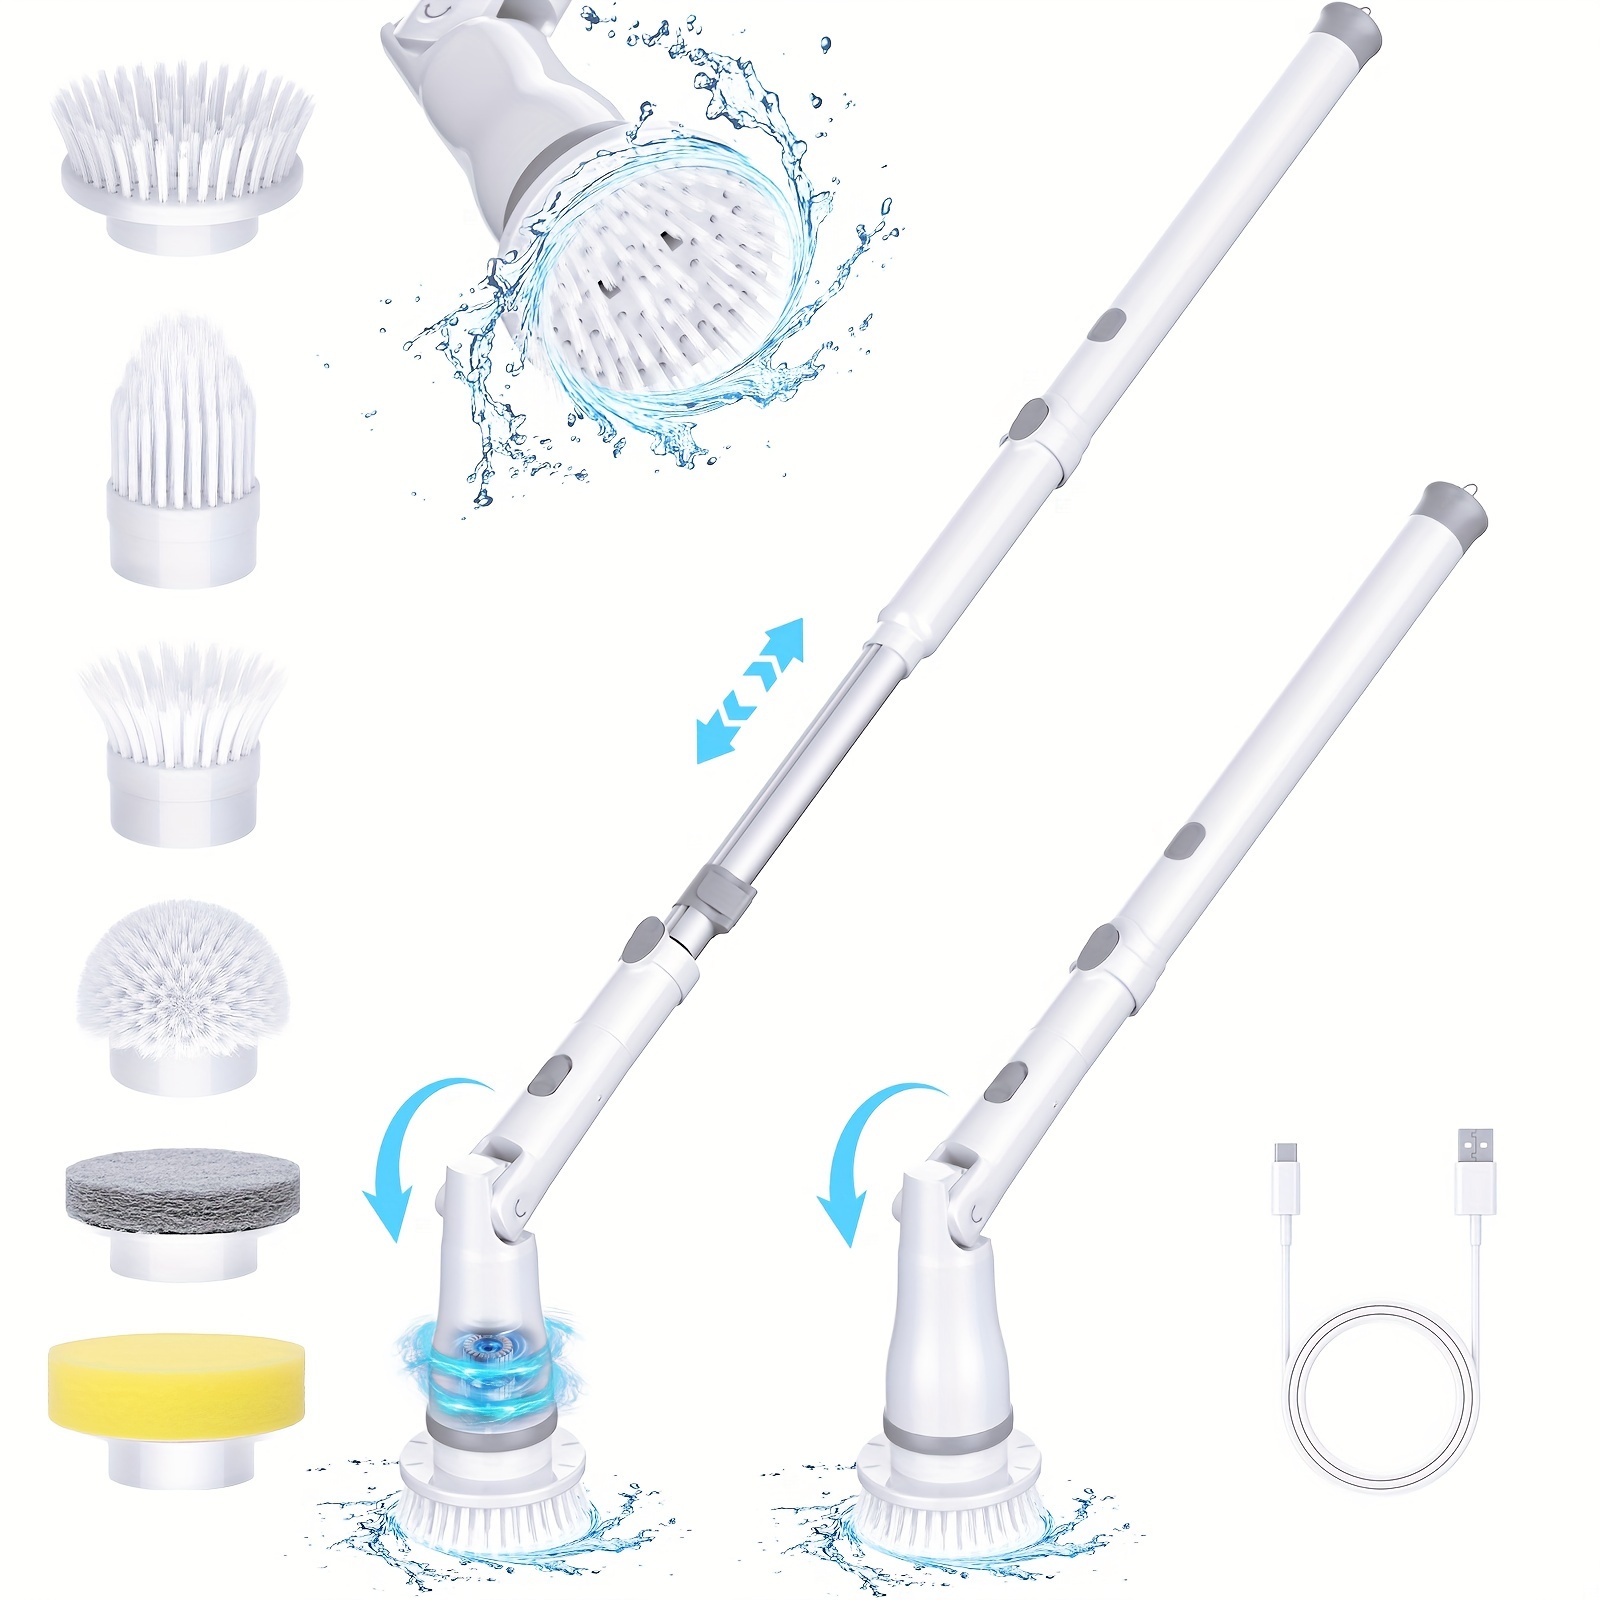 

Lovewe Electric Spin Scrubber, Cordless Cleaning Brush With 2 Adjustable Speeds And Extendable Long Handle, Long Runtime Scrubber With 6 Replaceable Brush Heads For Bathroom, Tub, Tile.